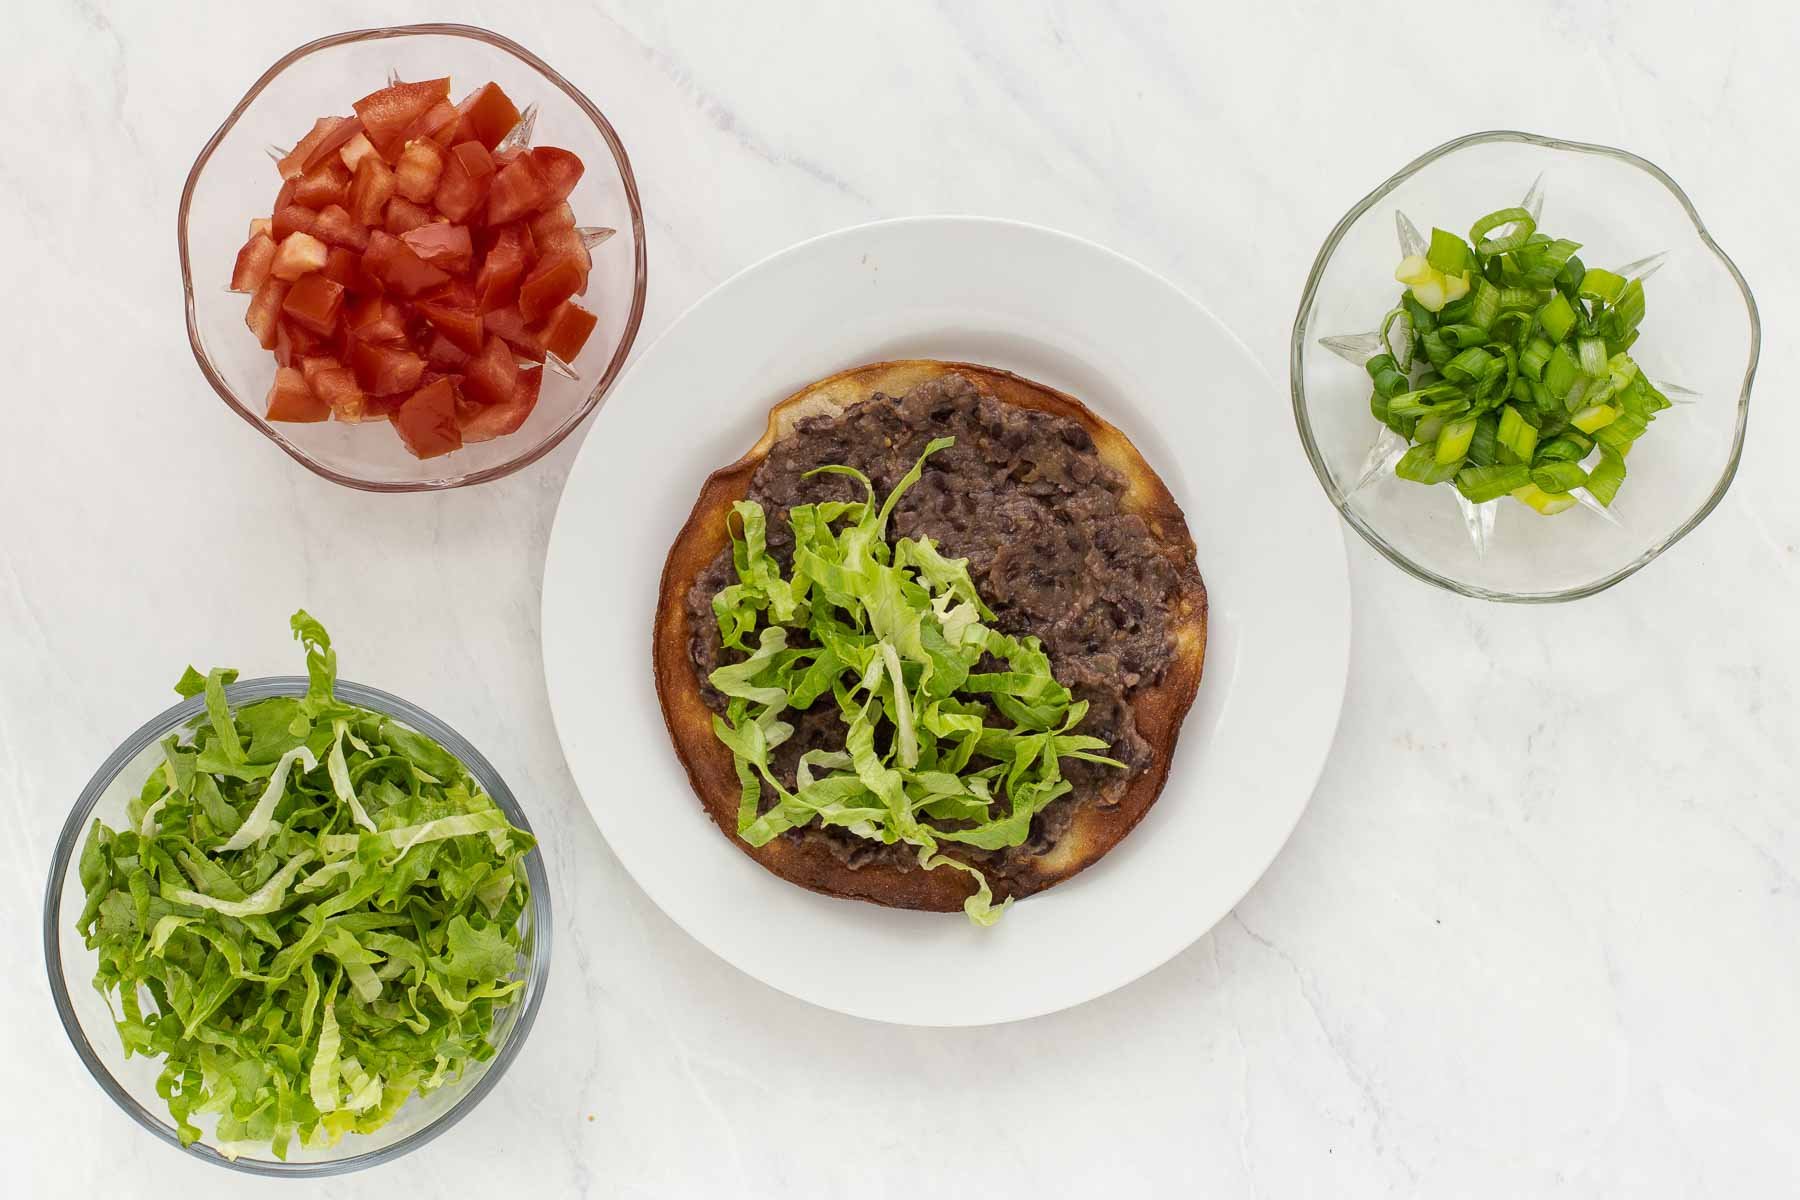 Layering lettuce and chopped tomatoes on a black bean tostada on a white plate.